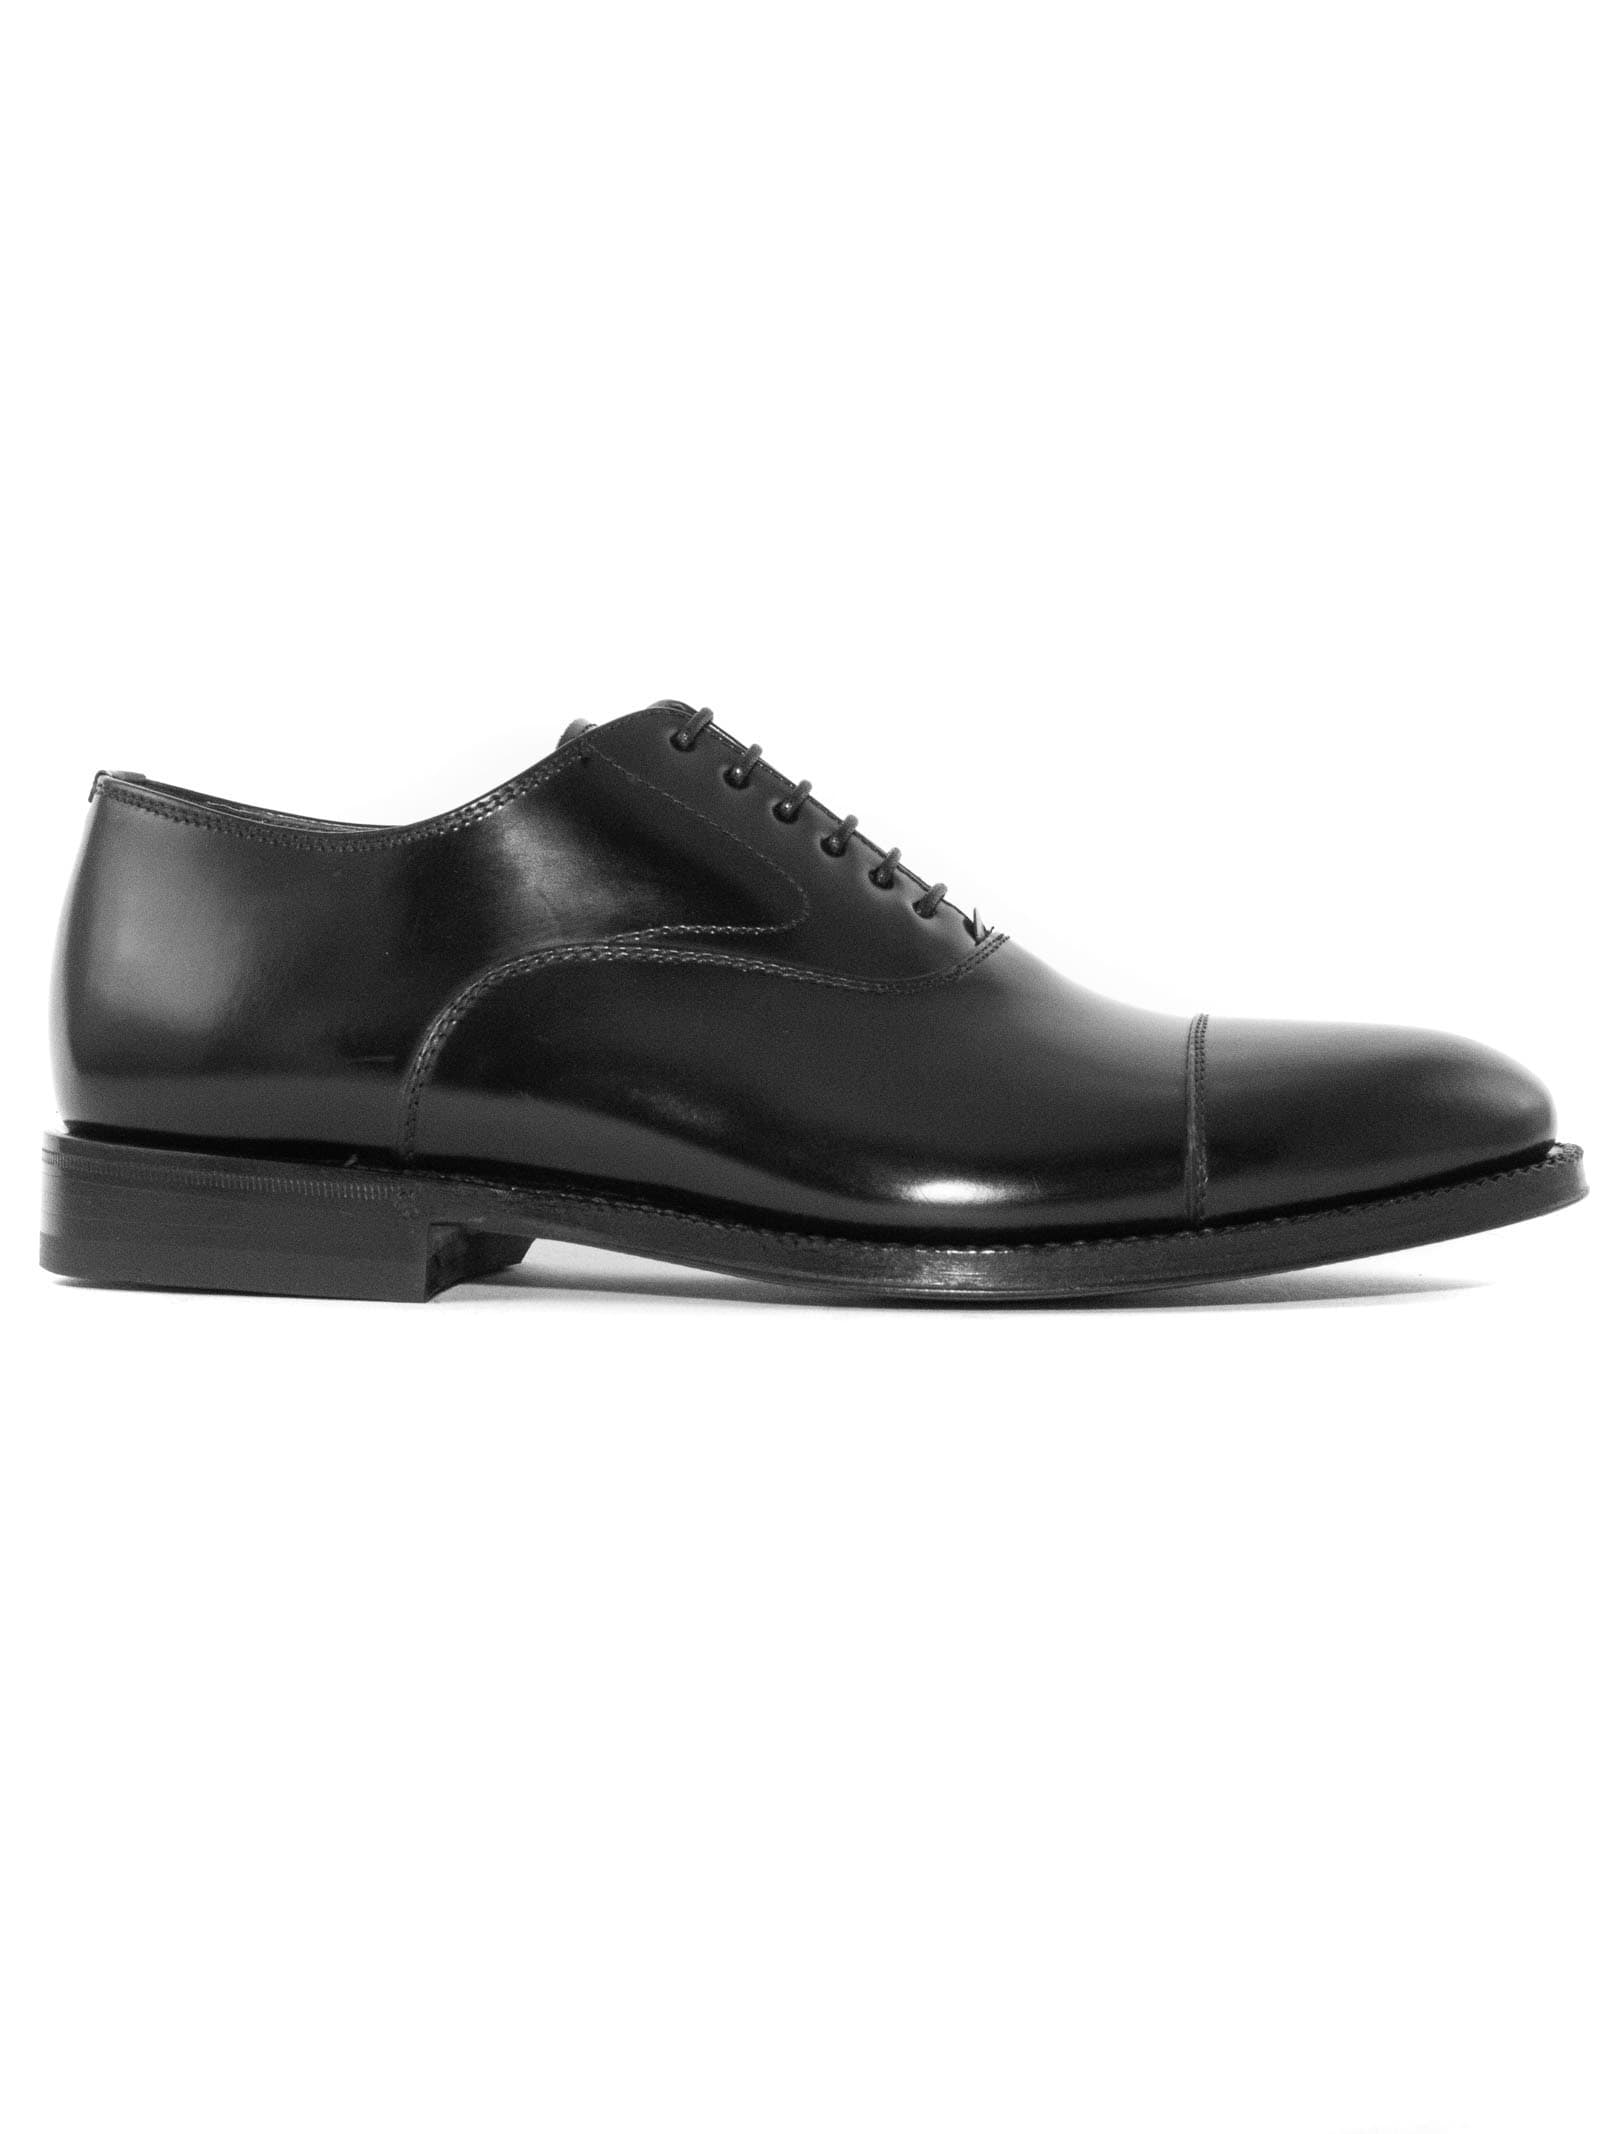 Green George Black Brushed Leather Oxford Shoes